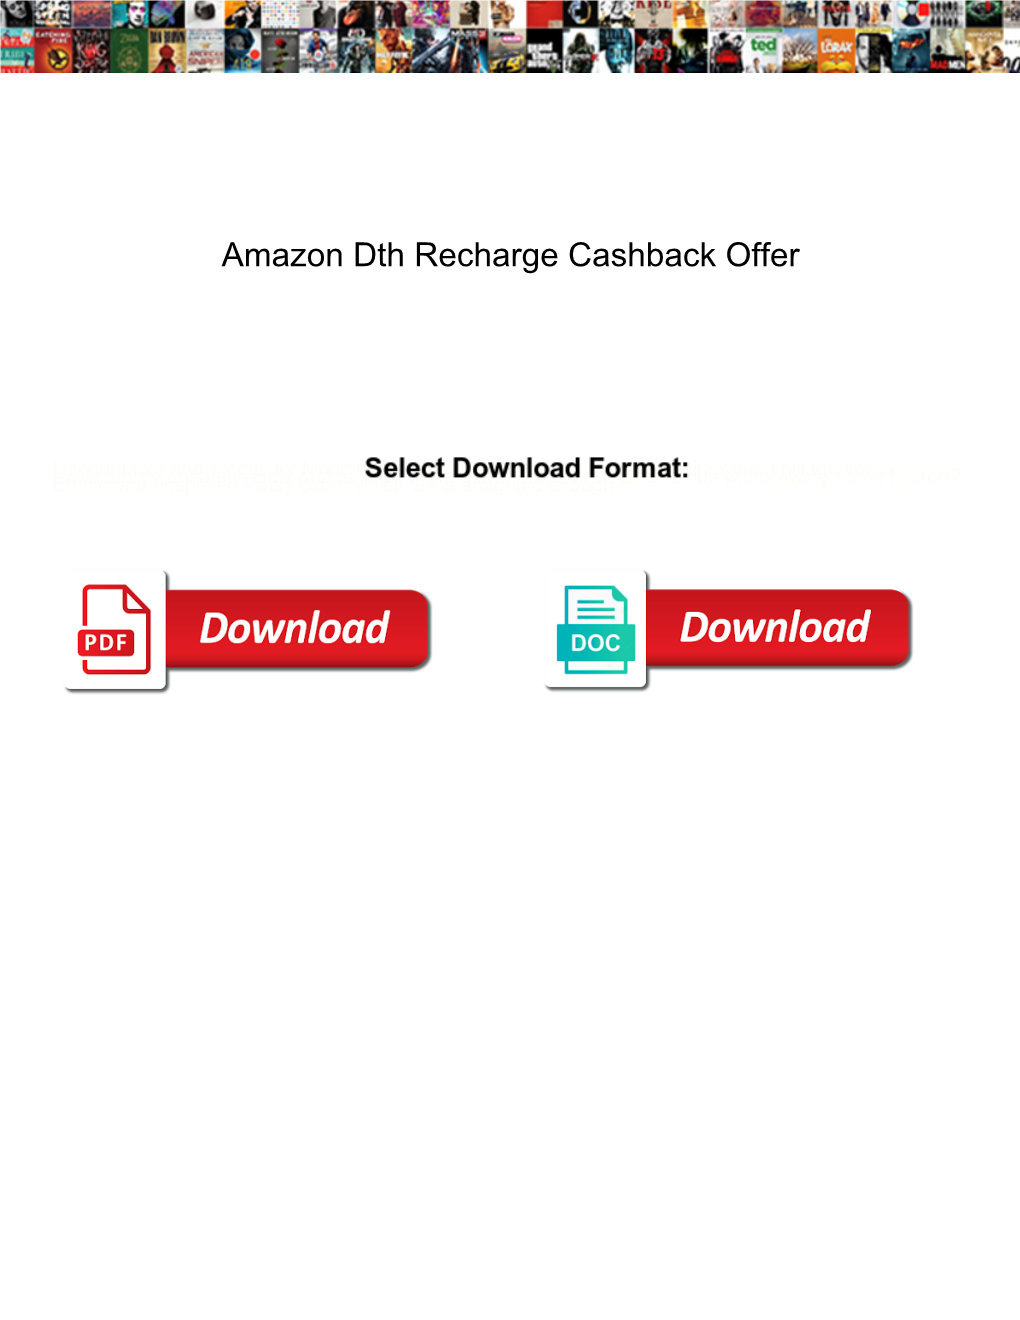 Amazon Dth Recharge Cashback Offer